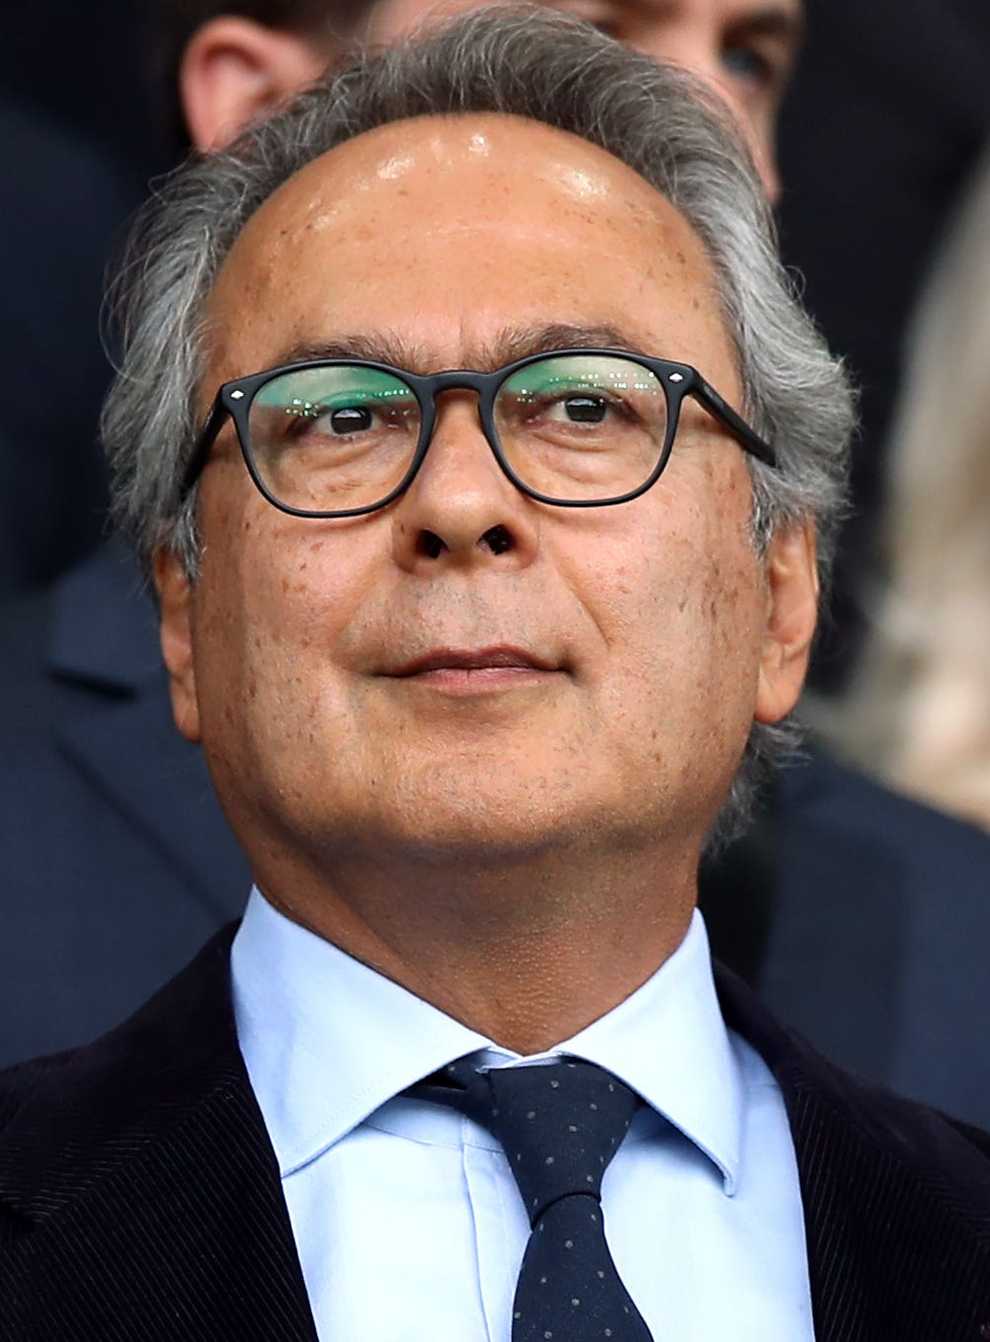 Everton owner Farhad Moshiri, pictured, has been called “foolish” by former striker Kevin Campbell (Peter Byrne/PA)